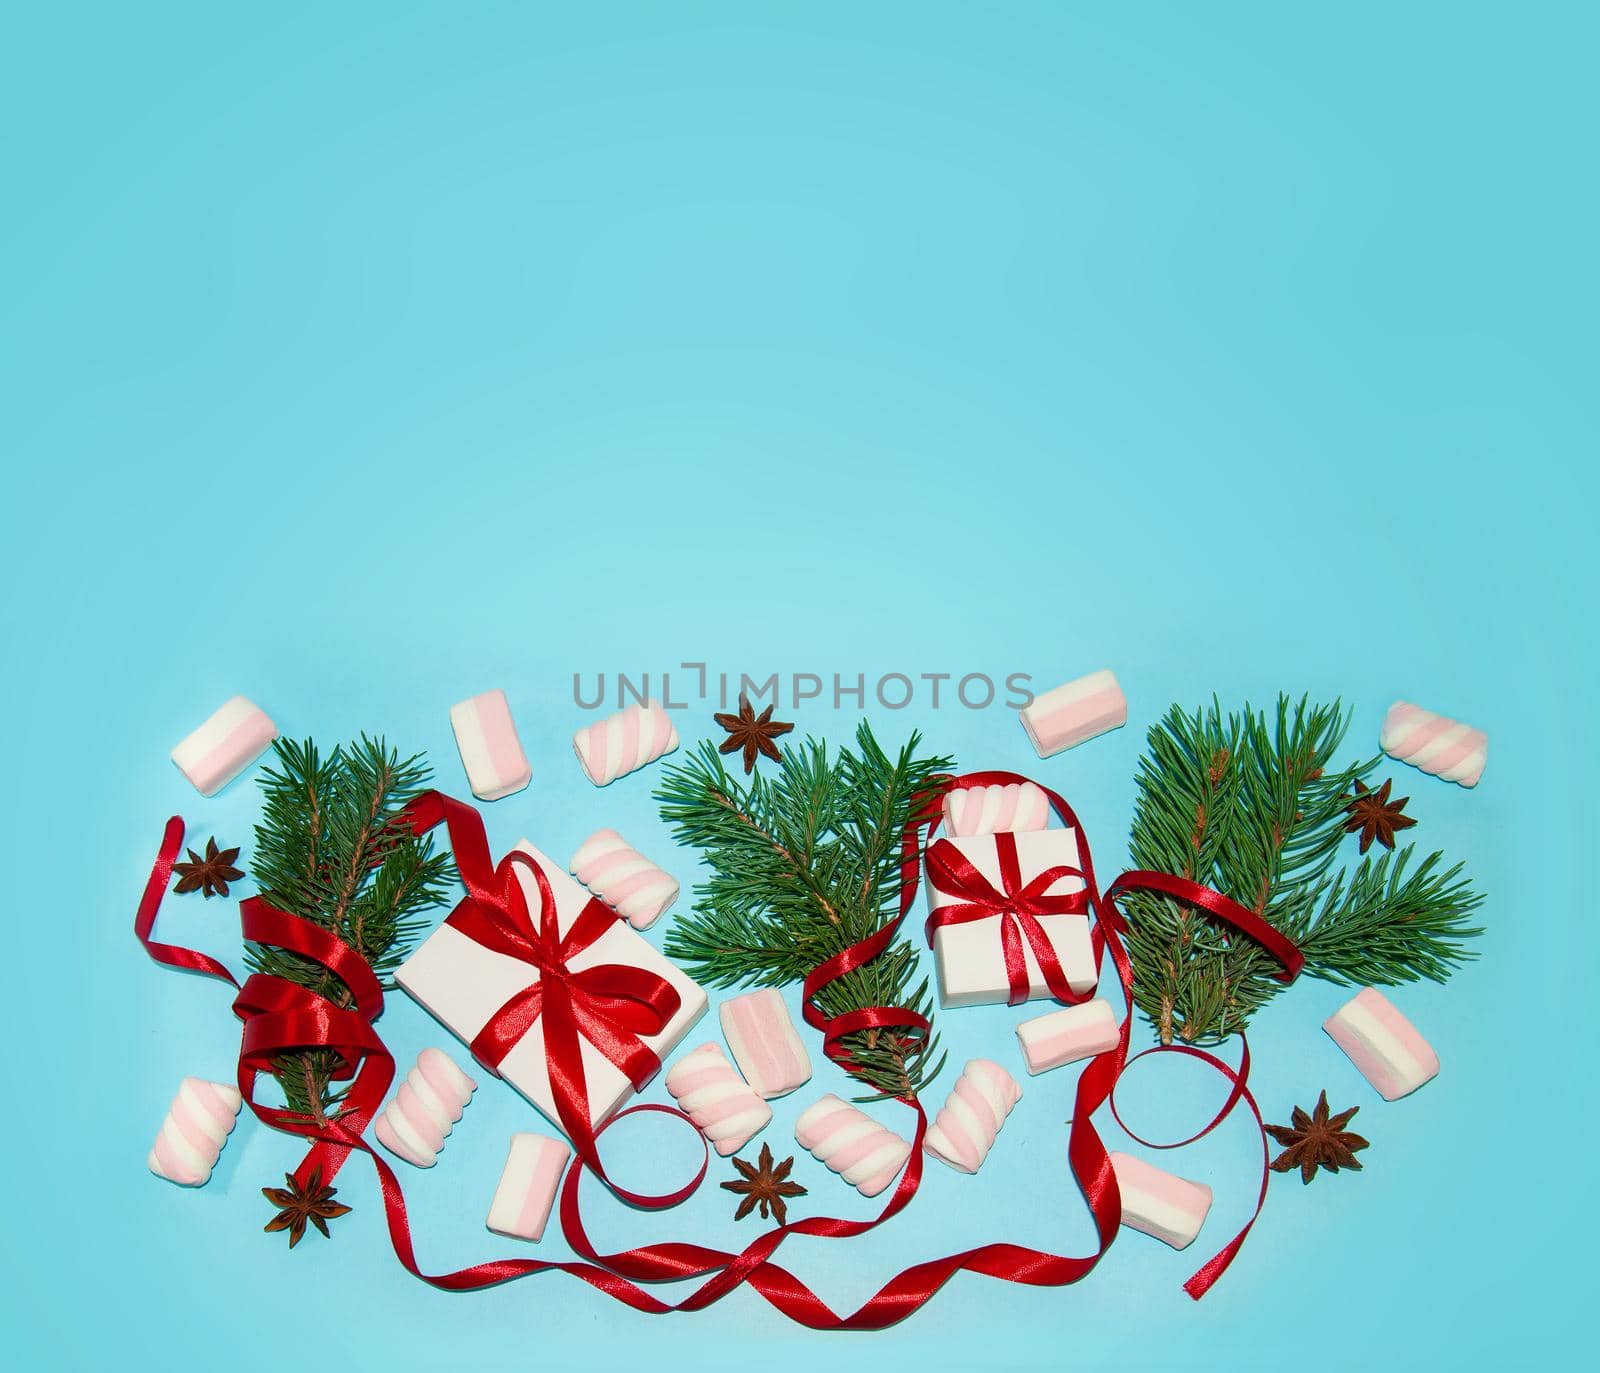 Christmas Holiday Composition. New Year Gift in White Box with Red Ribbon Fir Tree Branches Star Anise Marshmallows on Blue Background Flat Lay Top View with Copy Space For Your Text